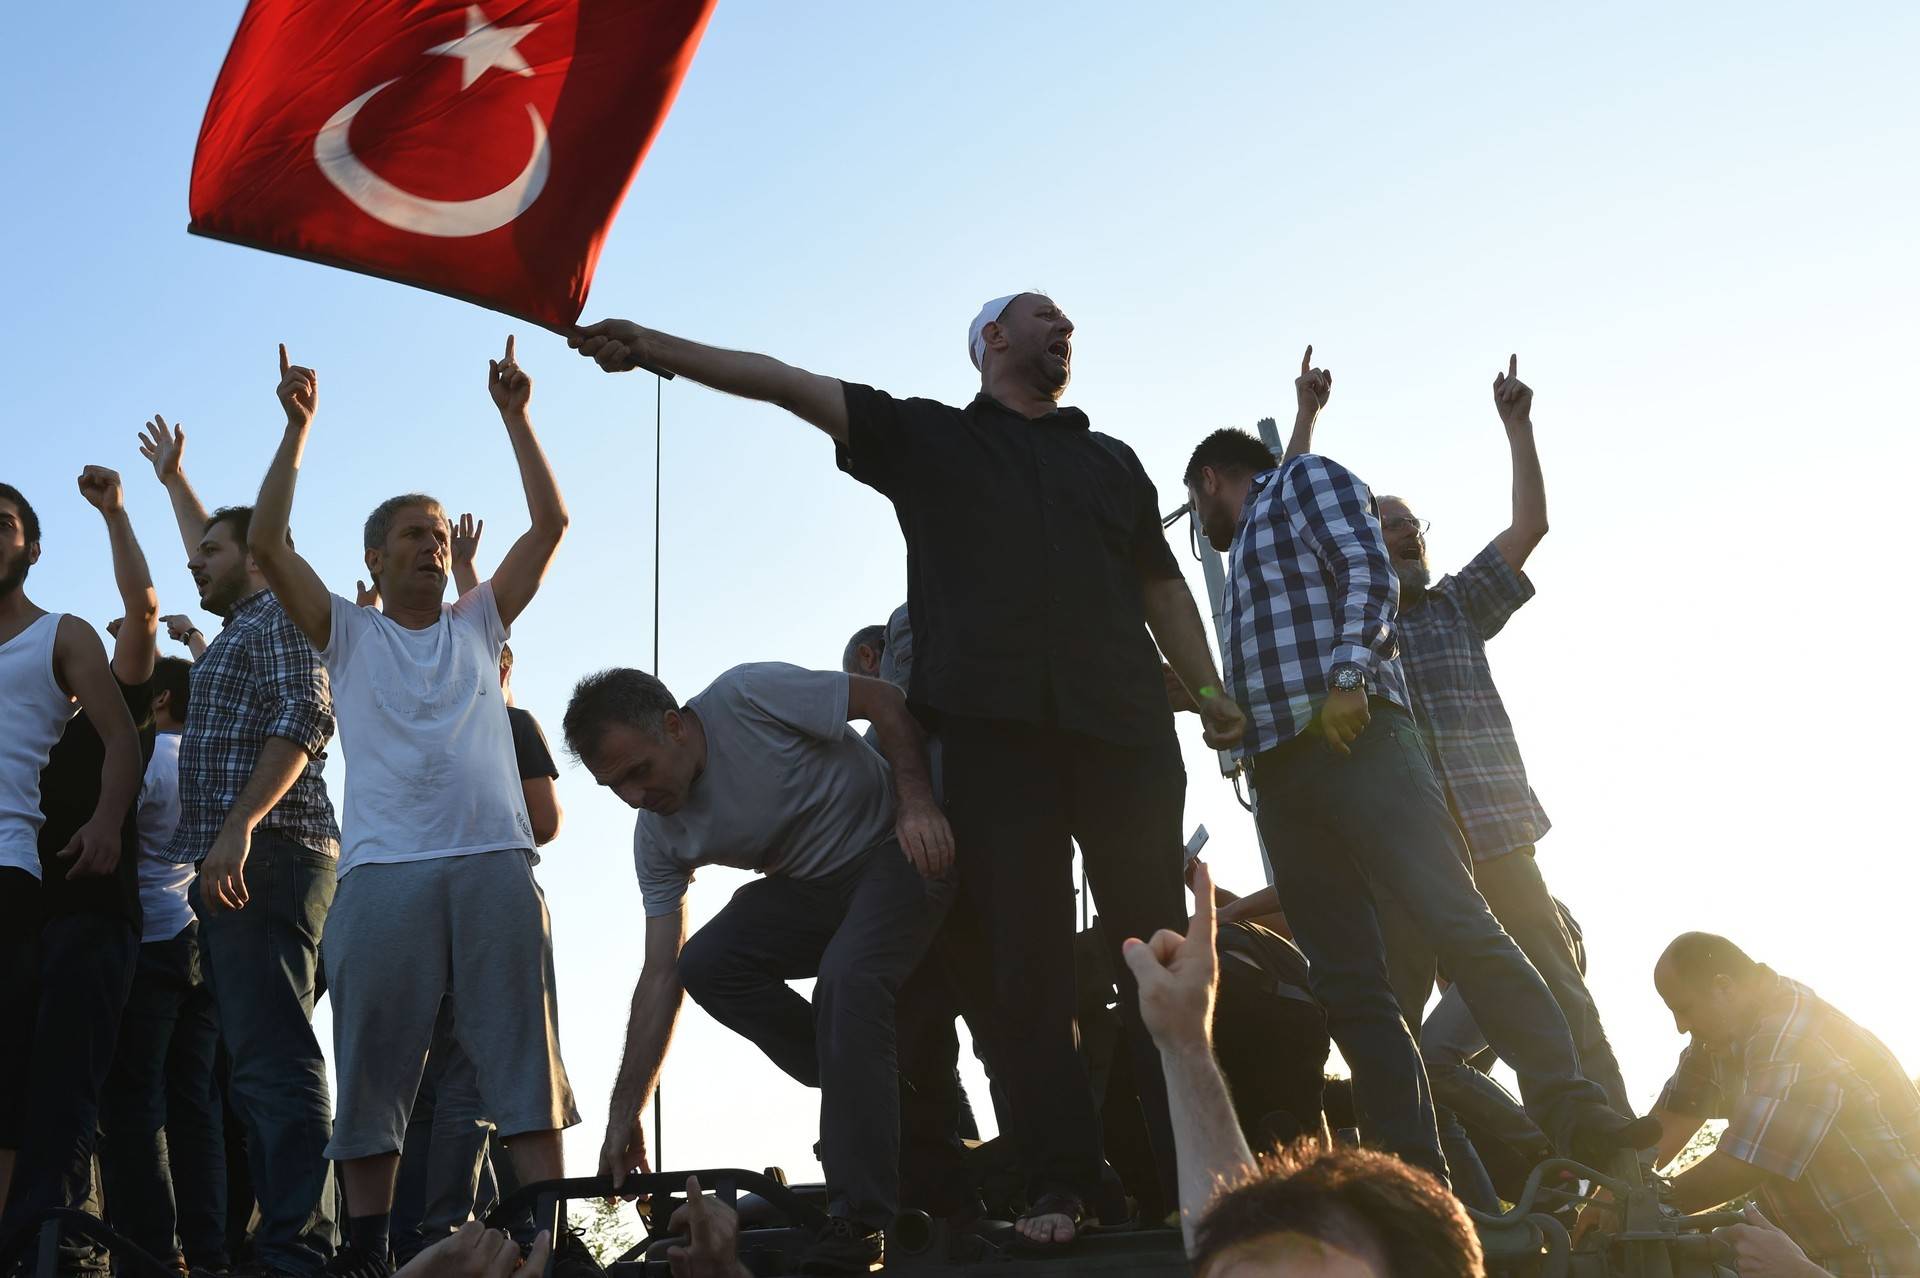 People react after they take over military position on the Bosphorus bridge in Istanbul on July 16, 2016. At least 60 people have been killed and 336 detained in a night of violence across Turkey sparked when elements in the military staged an attempted coup, a senior Turkish official said. The majority of those killed were civilians and most of those detained are soldiers, said the official, without giving further details.  BULENT KILIC/AFP/Getty Images